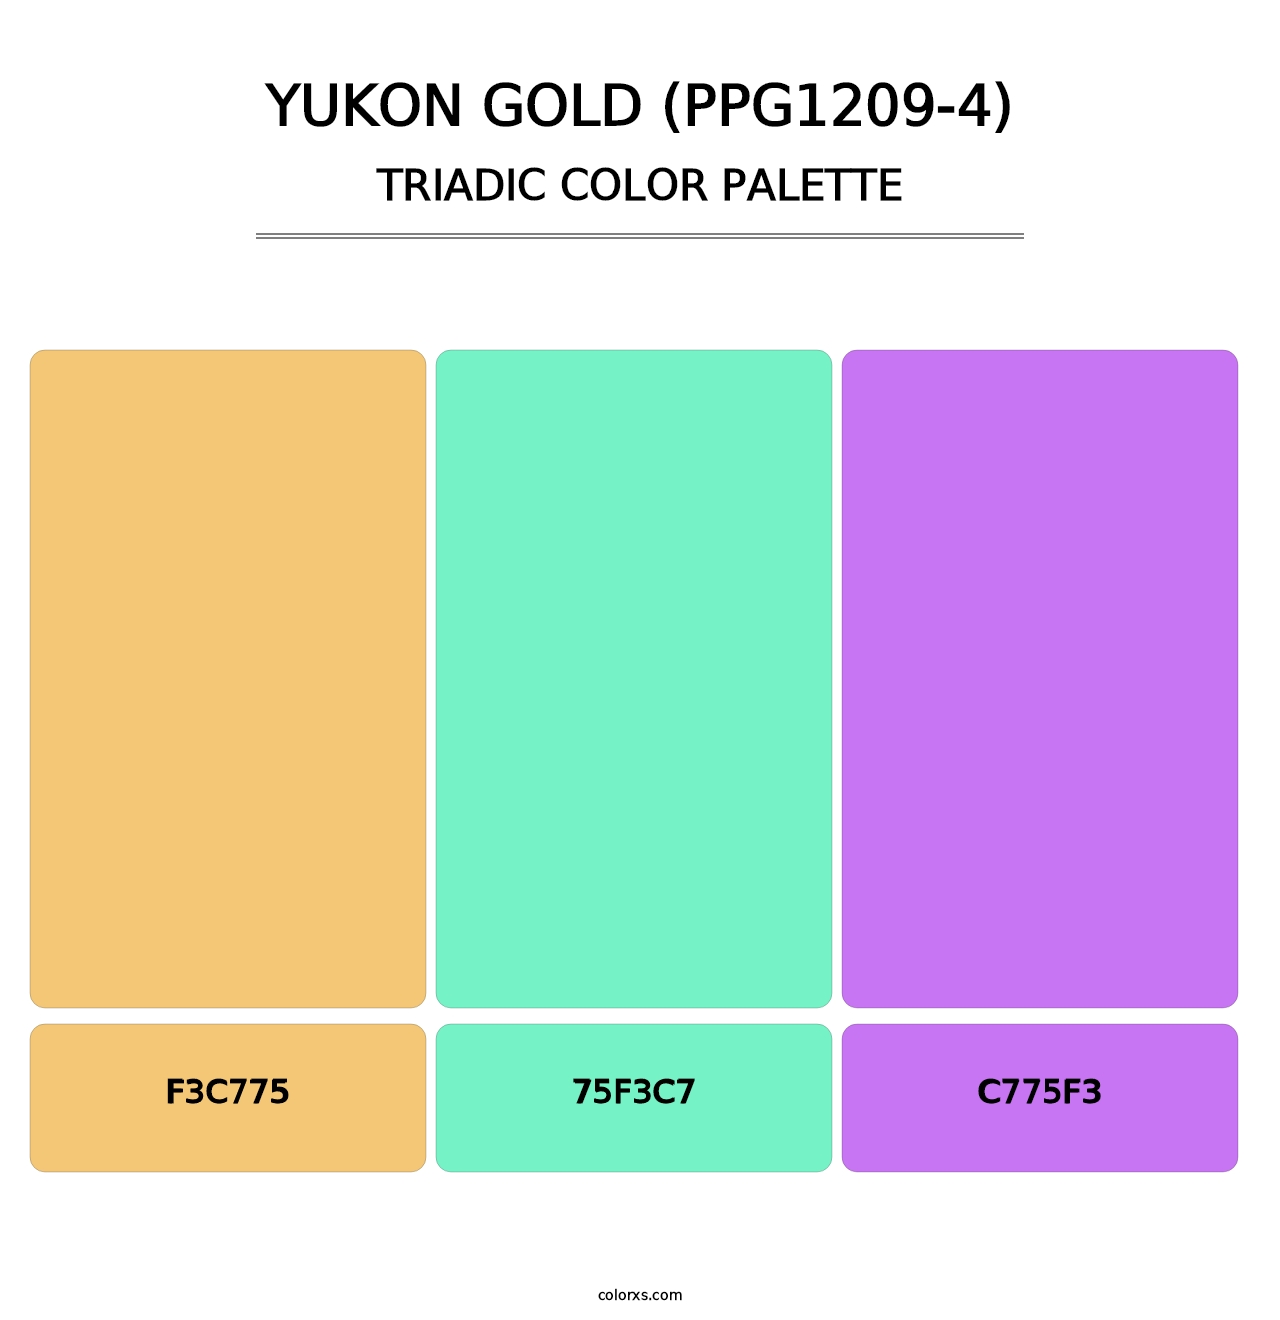 Yukon Gold (PPG1209-4) - Triadic Color Palette